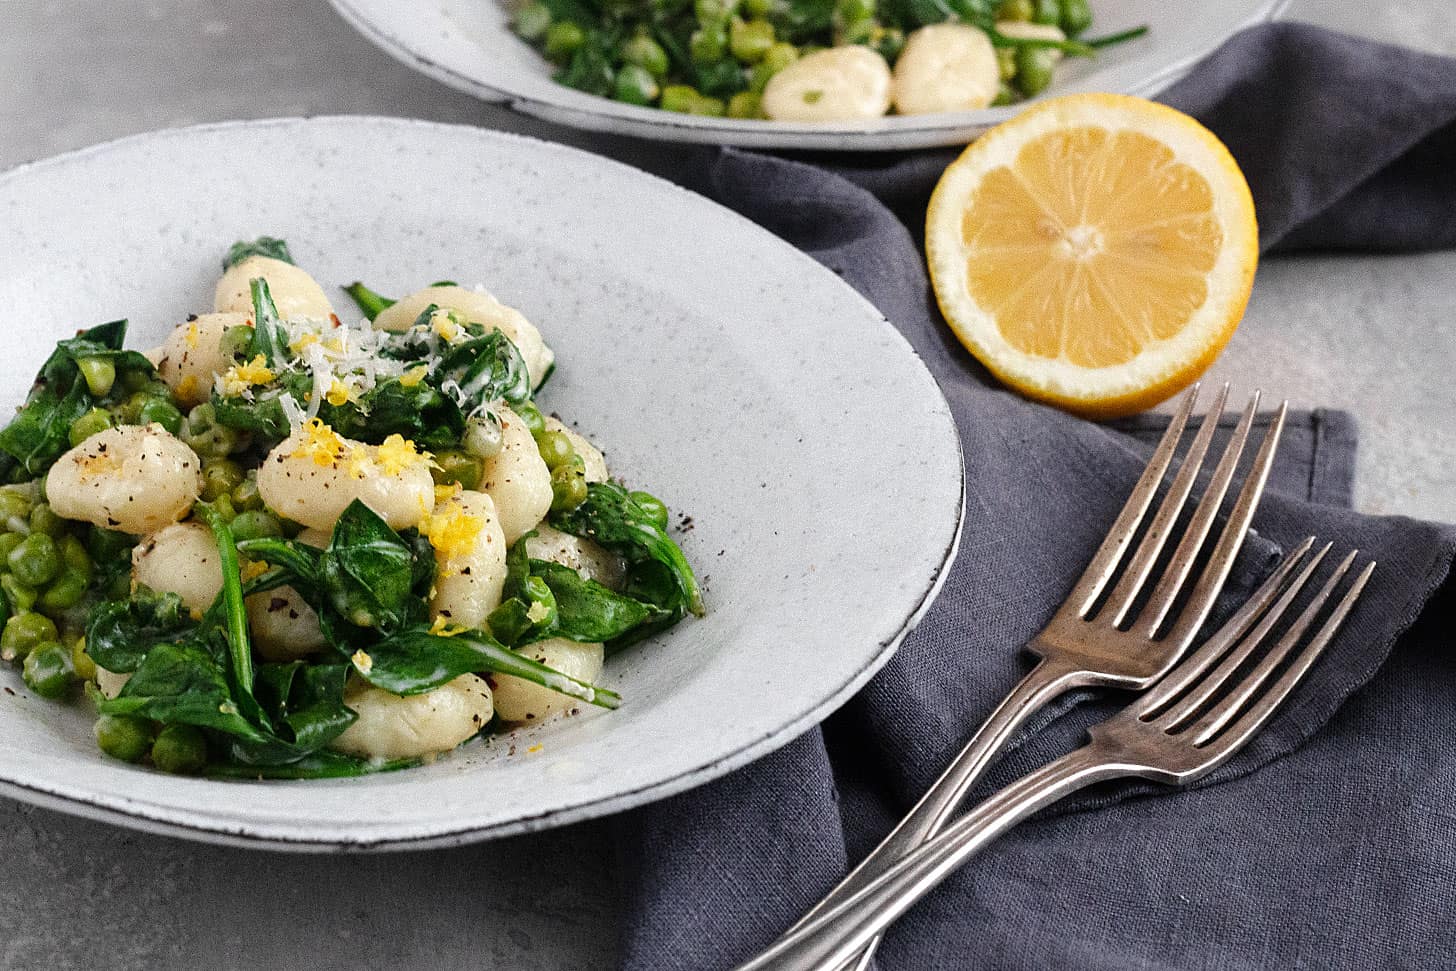 creamy lemon gnocchi with peas and spinach in bowls